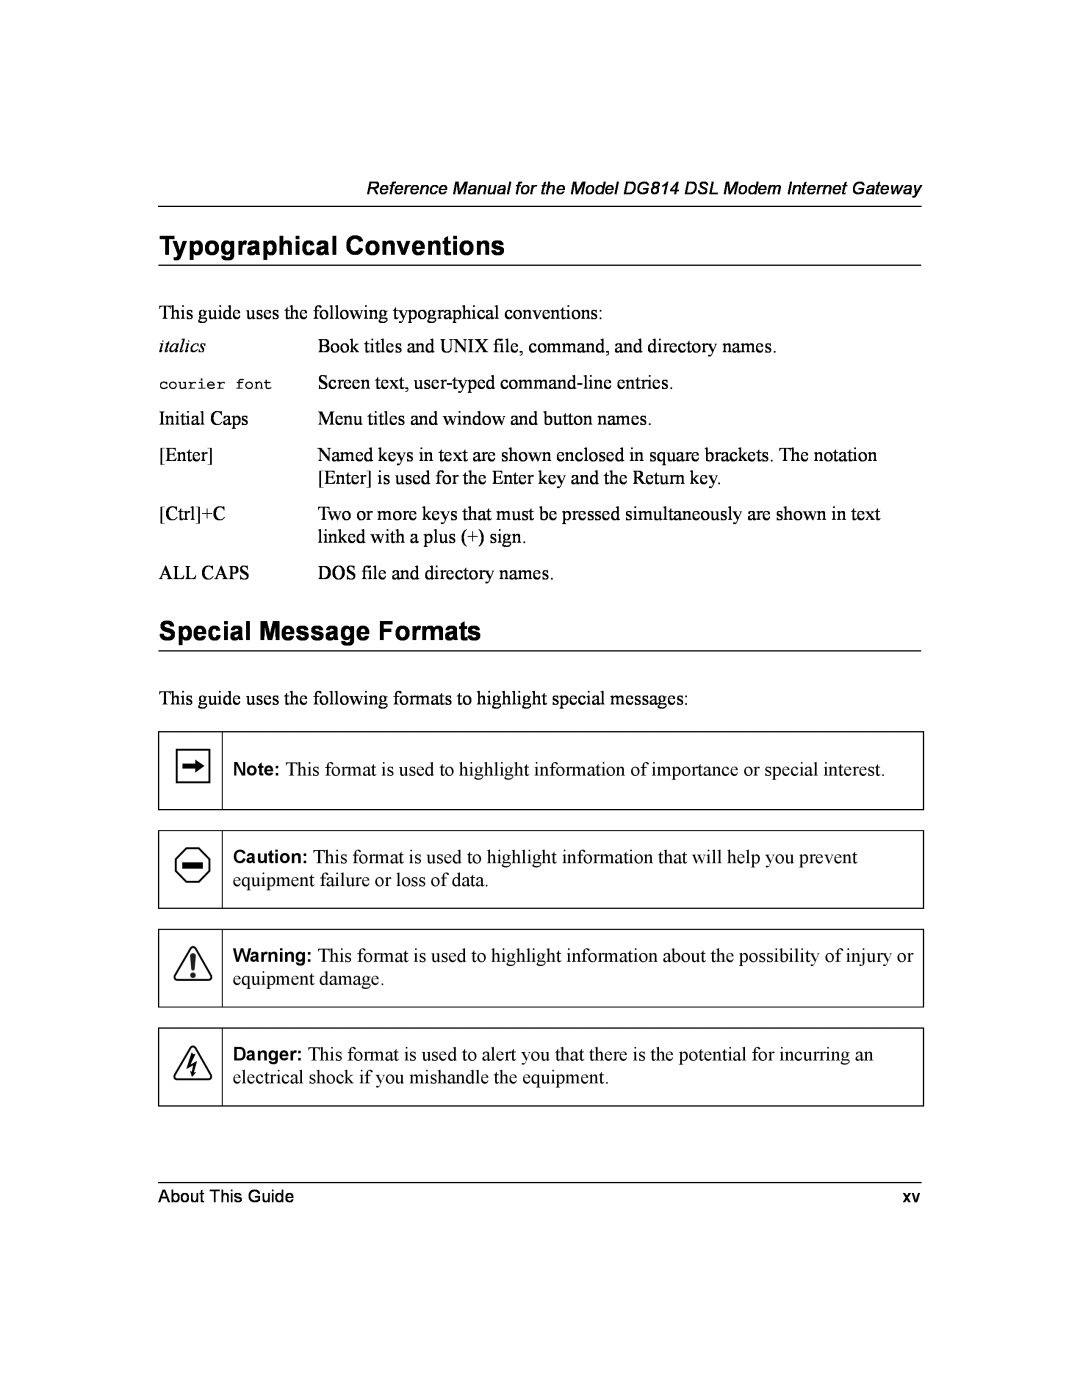 NETGEAR DG814 DSL manual Typographical Conventions, Special Message Formats 